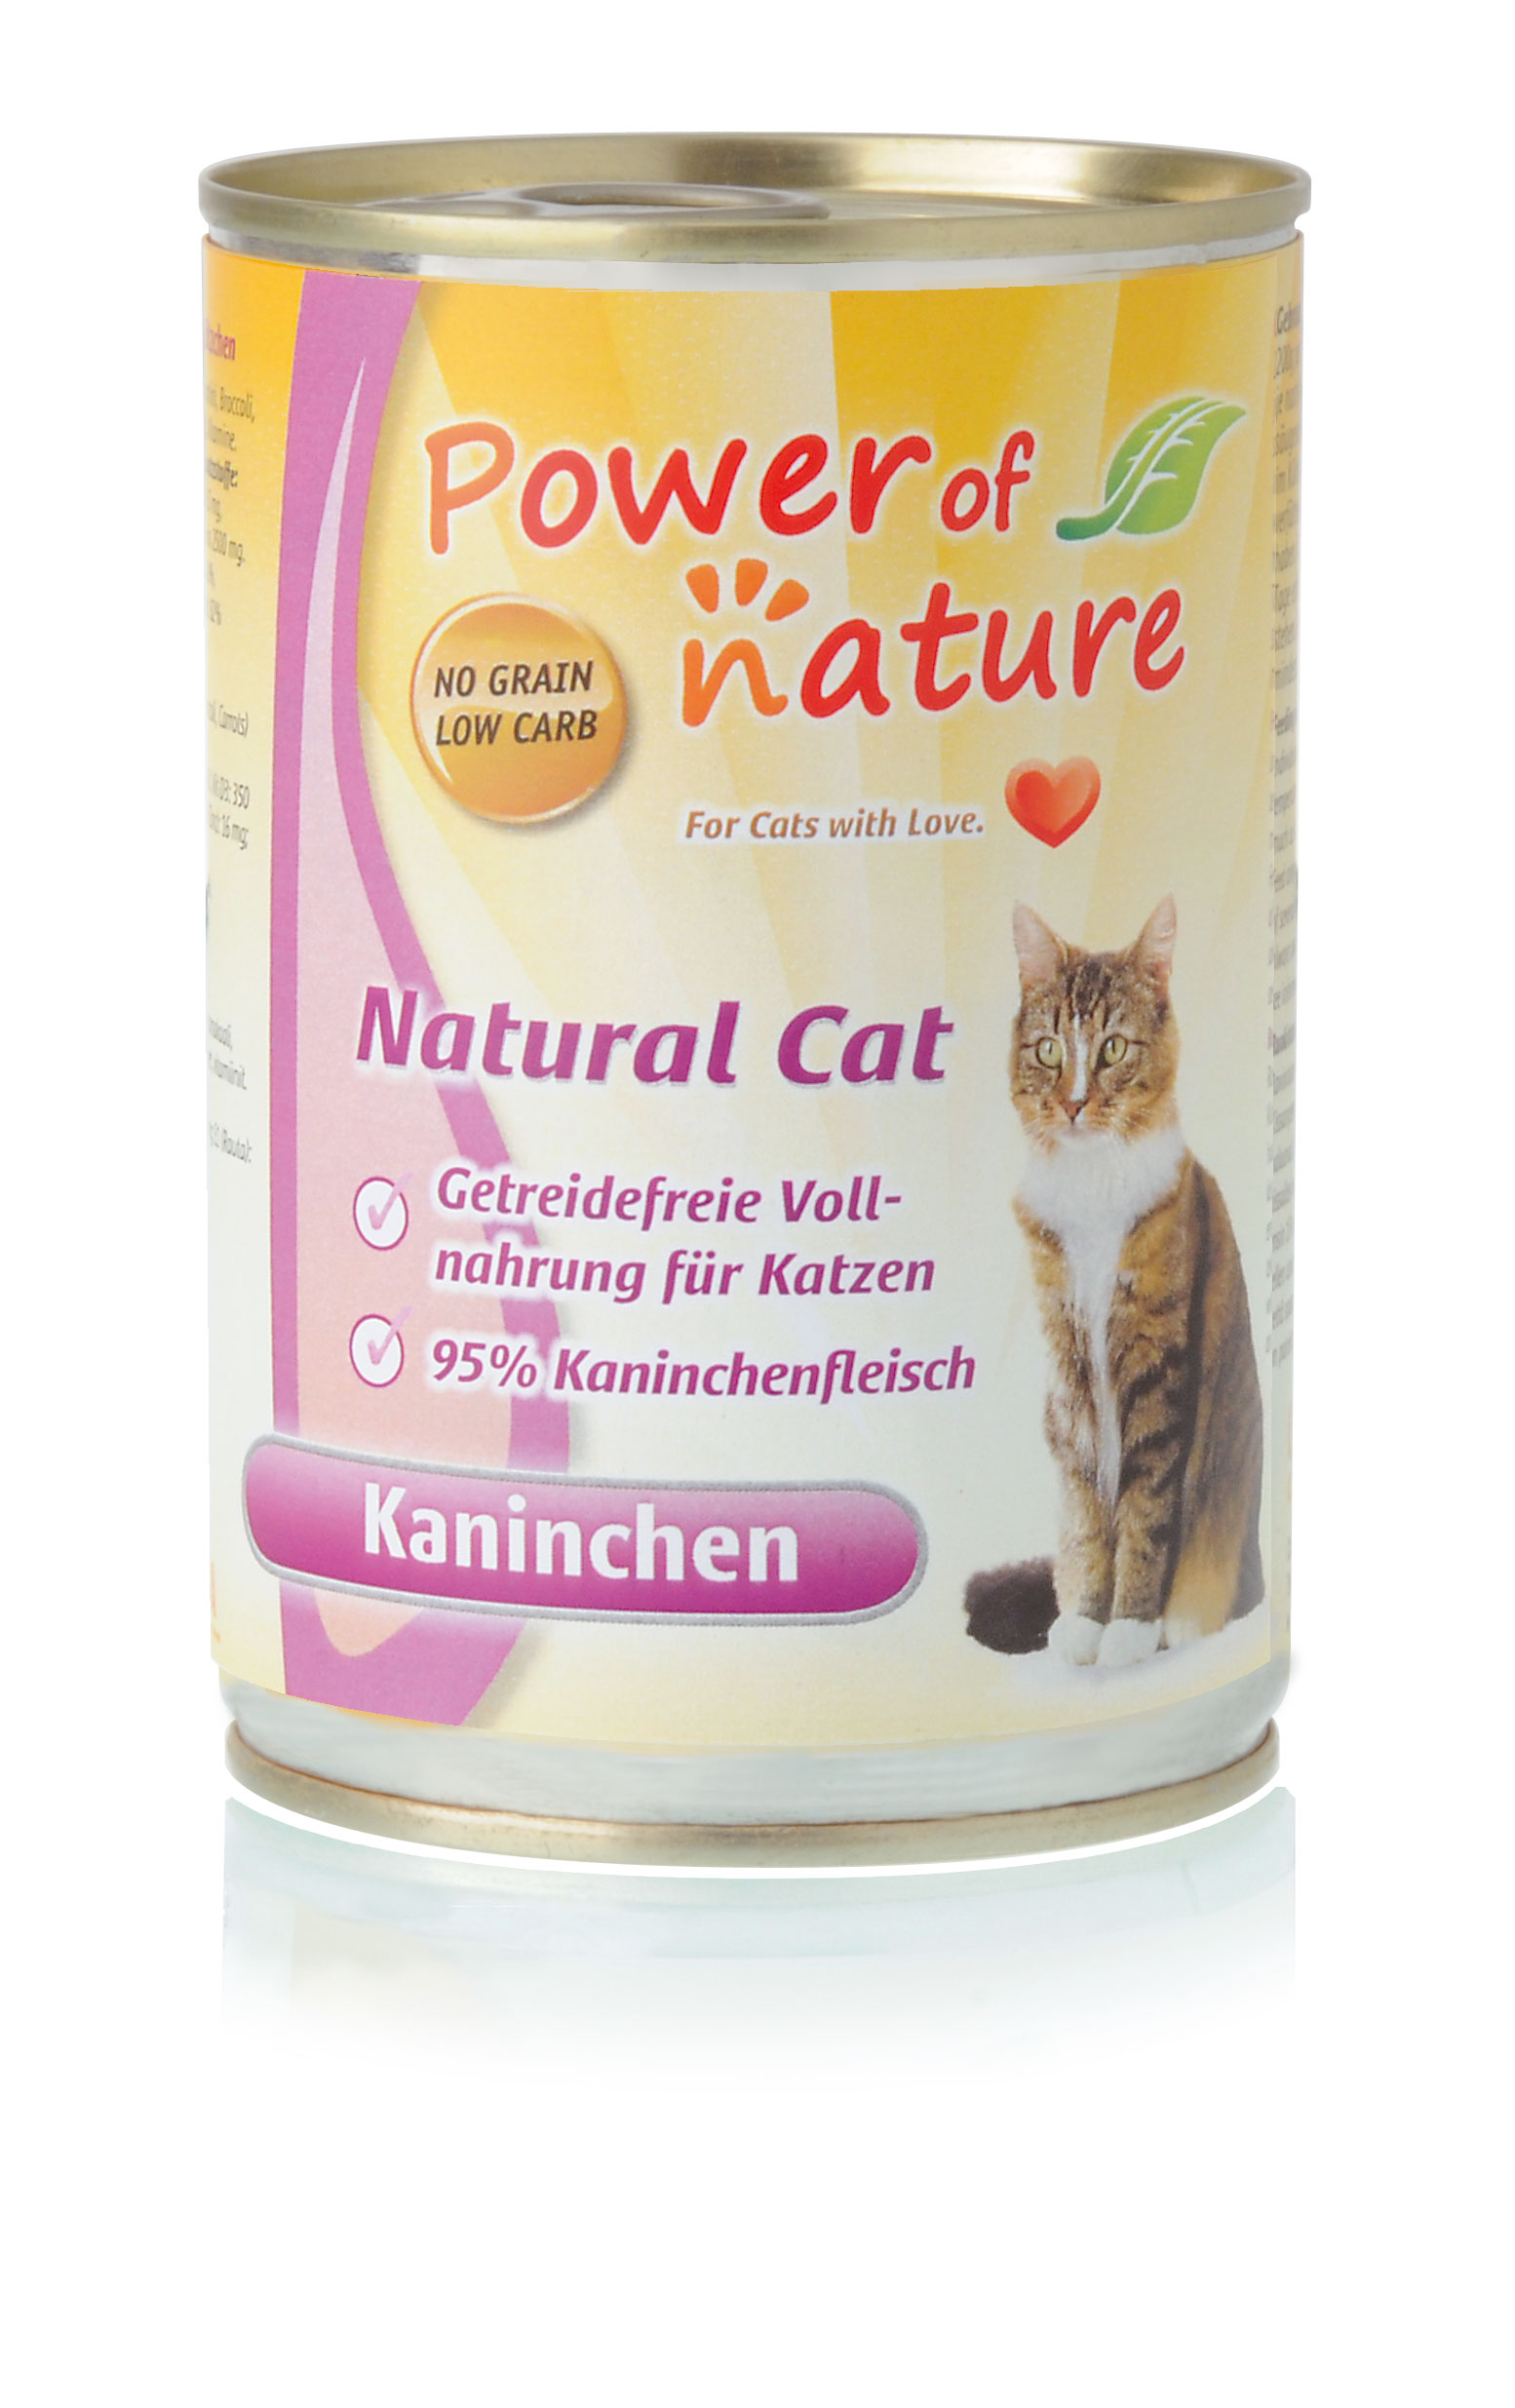 Power of Nature Natural Cat Dose Kaninchen 24 x 400g